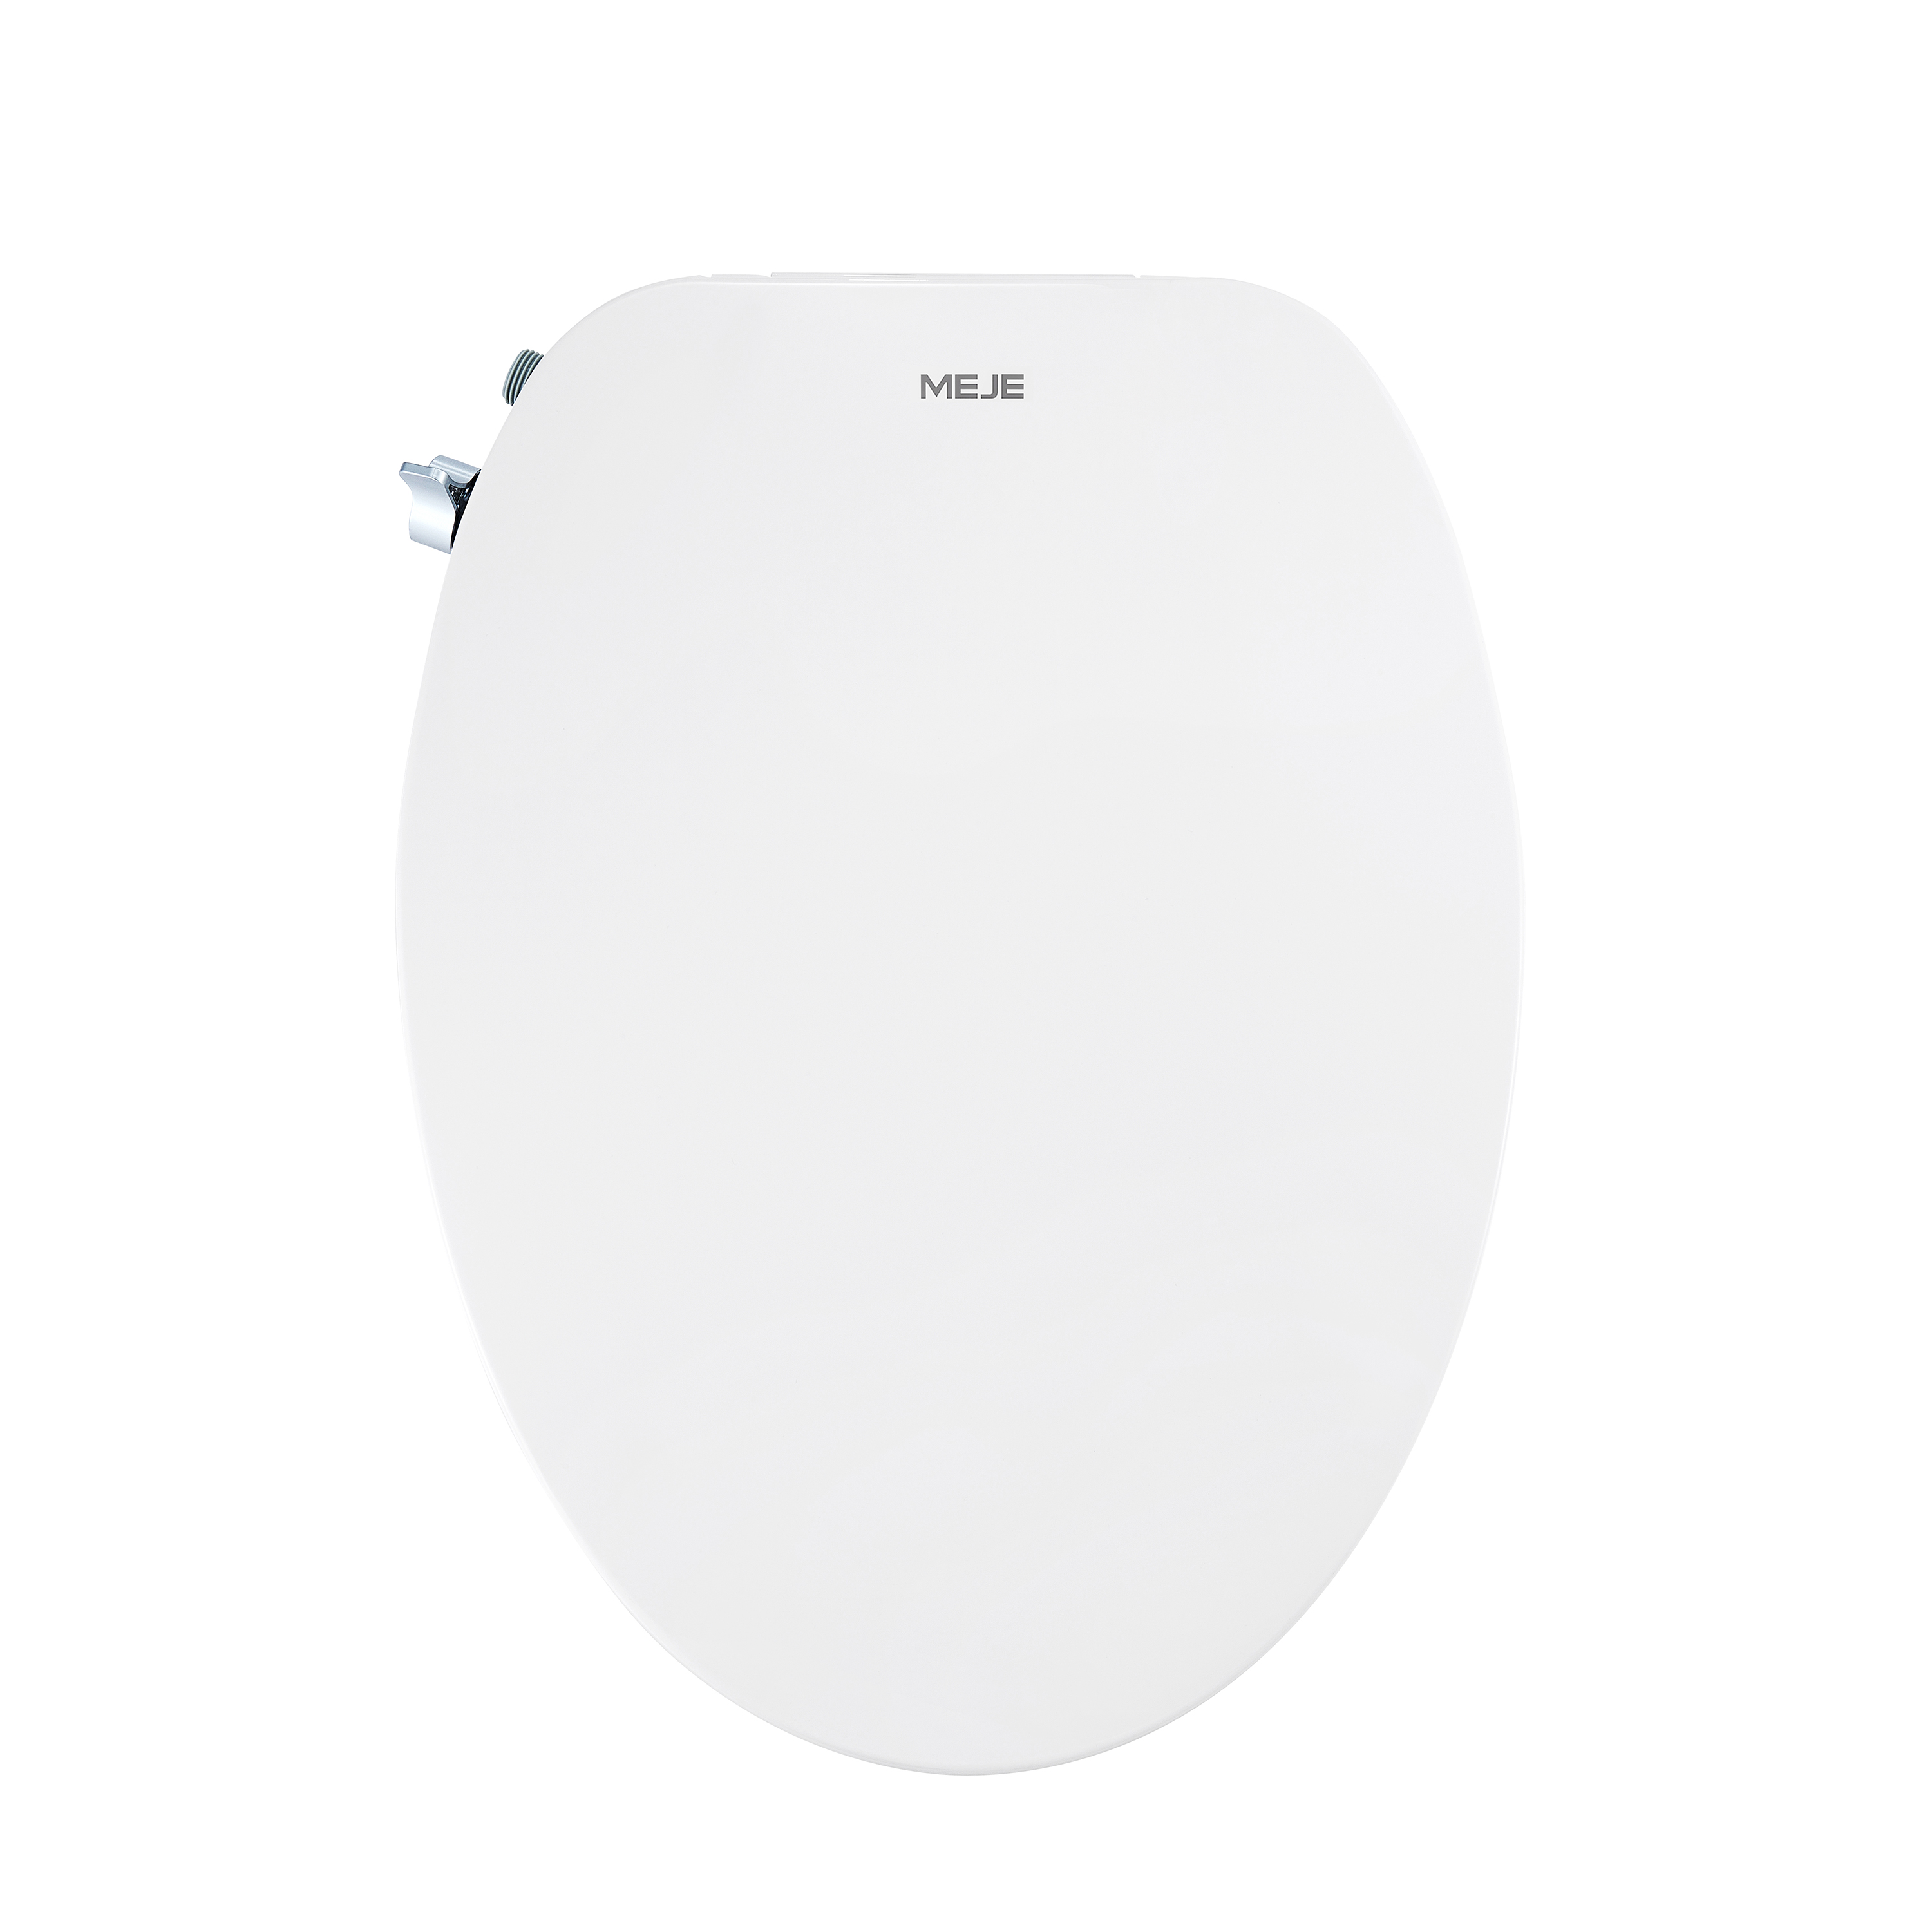 MEJE #VB-L Non-Electric Bidet Toilet Seat, Fits Elongated Toilets, White – Dual Nozzle with Adjustable Sprayers,Easy Installation…